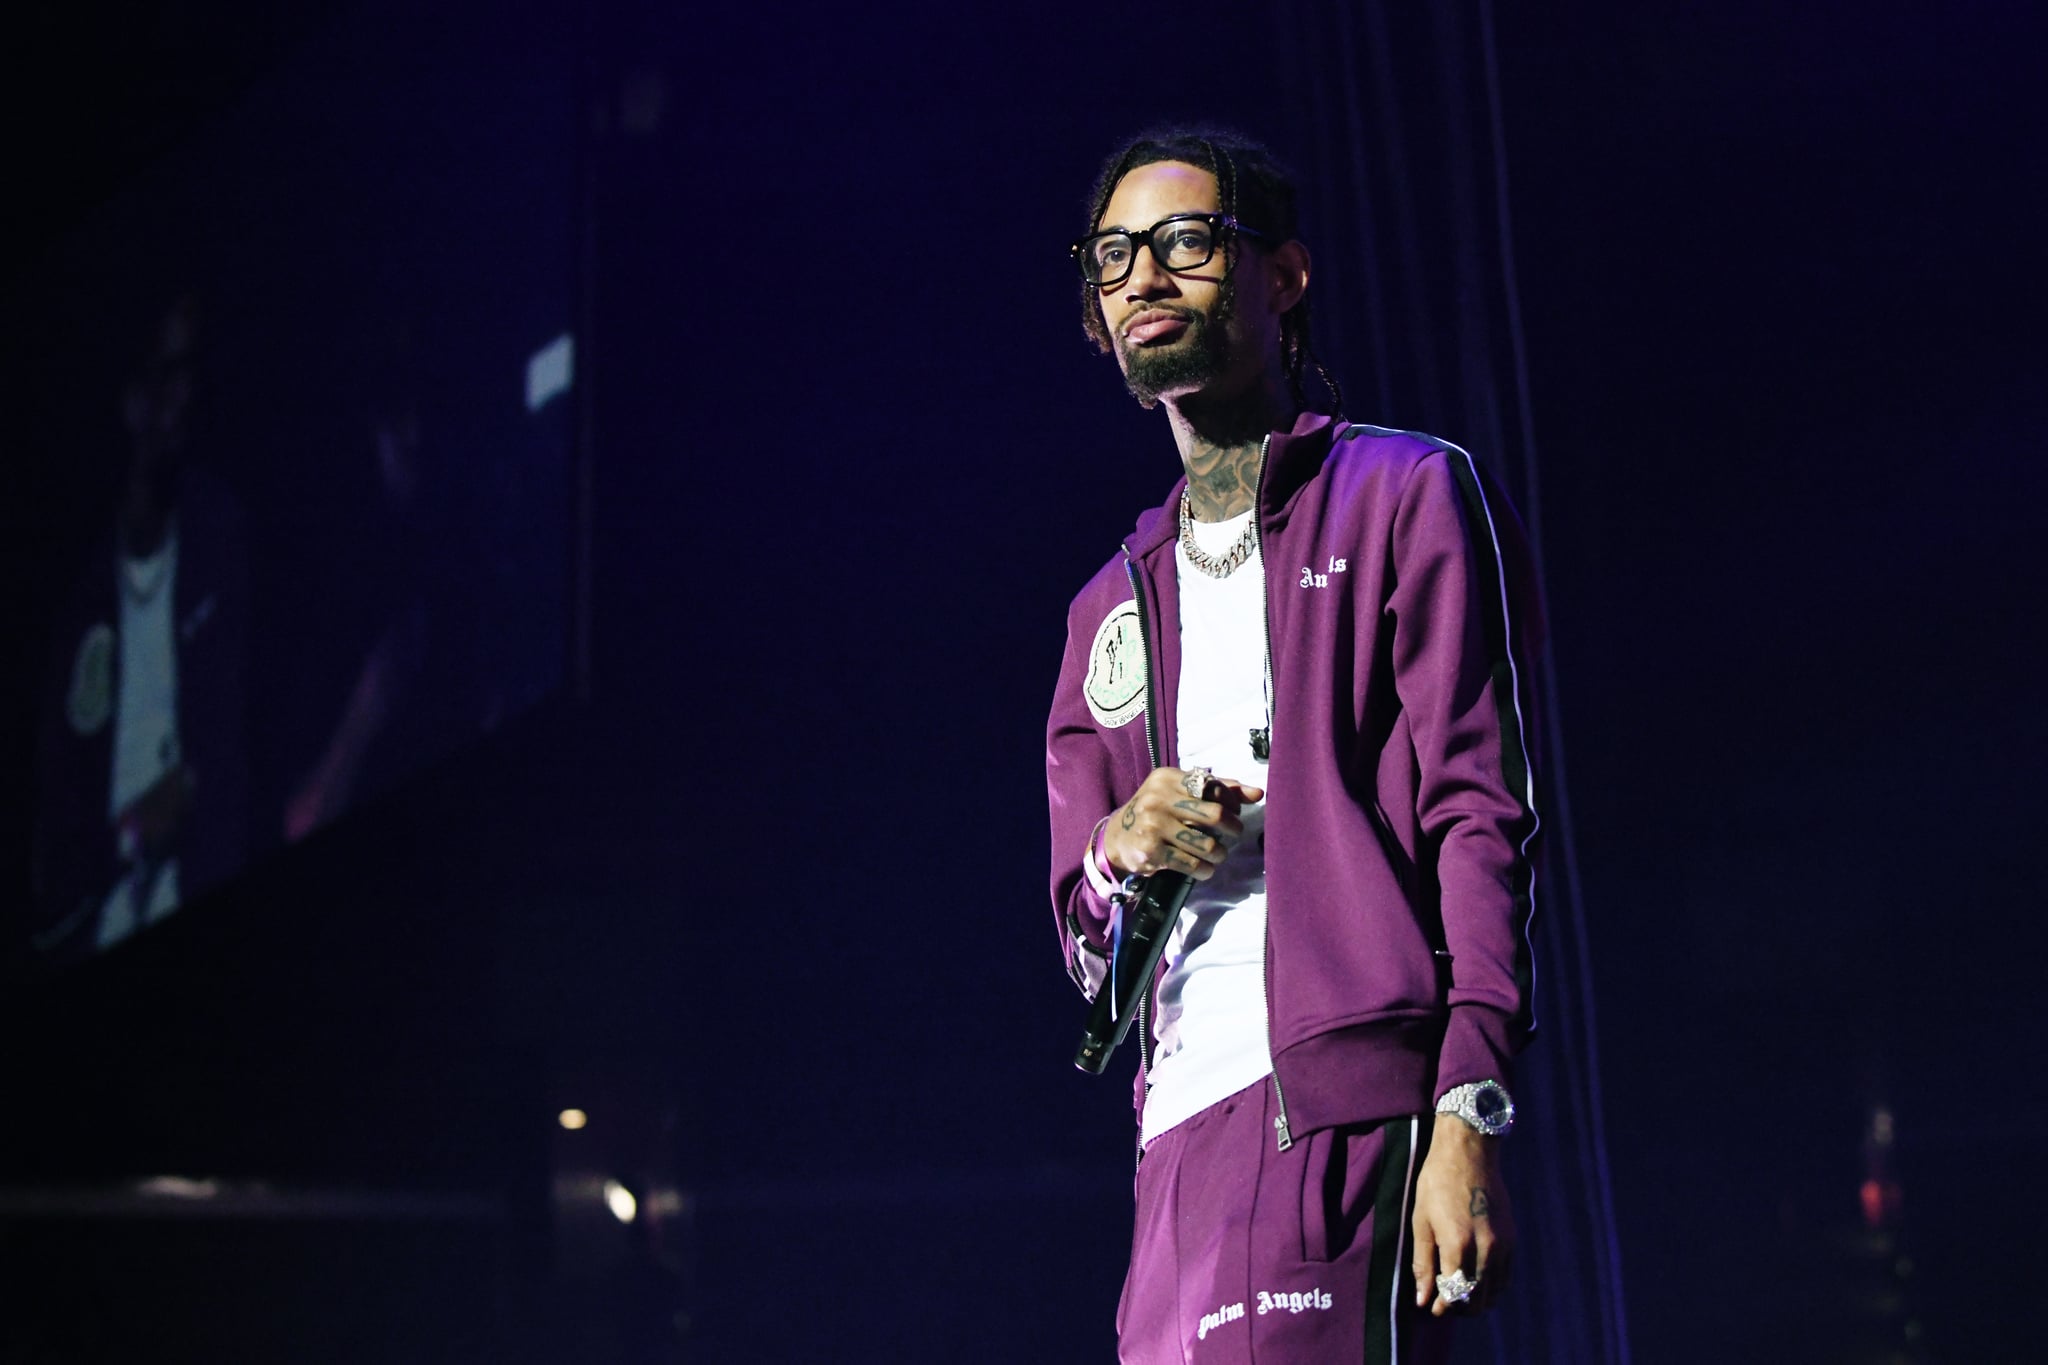 LOS ANGELES, CALIFORNIA - JUNE 22: PnB Rock performs onstage at the STAPLES Centre Concert Sponsored By Sprite during BET Experience at Staples Centre on June 22, 2019 in Los Angeles, California. (Photo by Michael Kovac/Getty Images for BET)